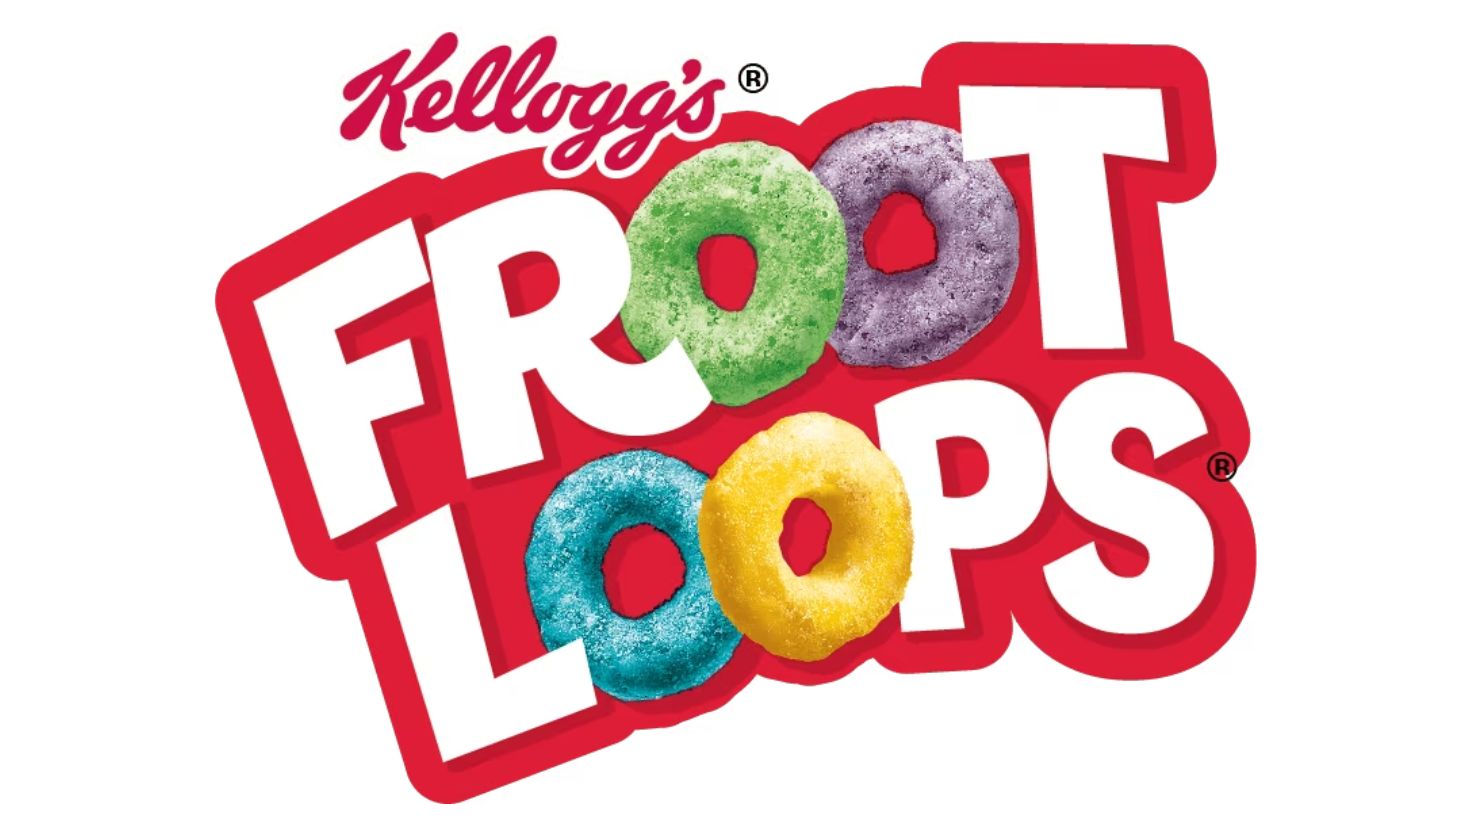 When Did Fruit Loops Change To Froot Loops